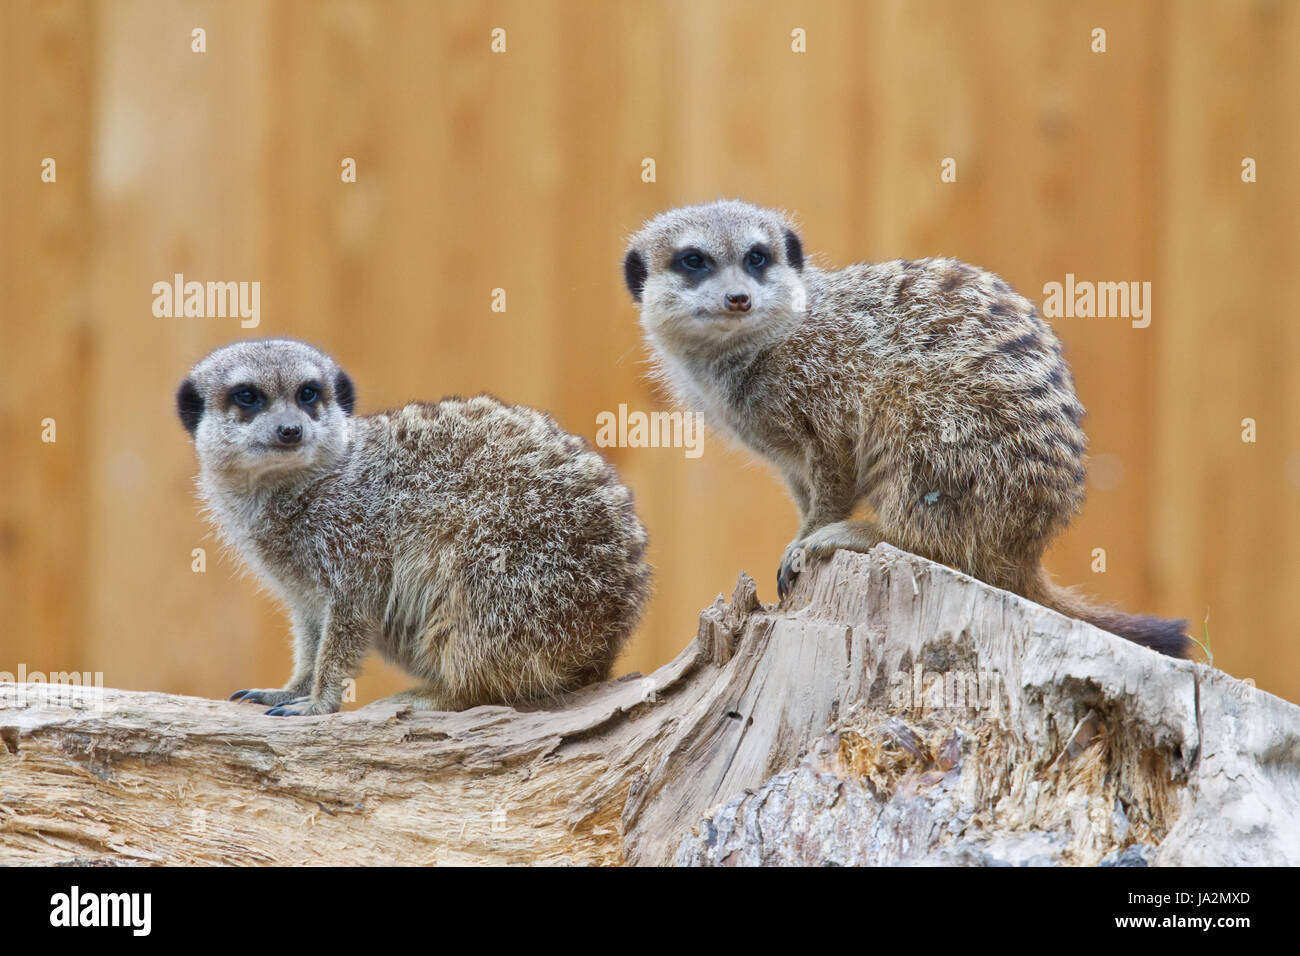 look, glancing, see, view, looking, peeking, looking at, wise, attentive, Stock Photo